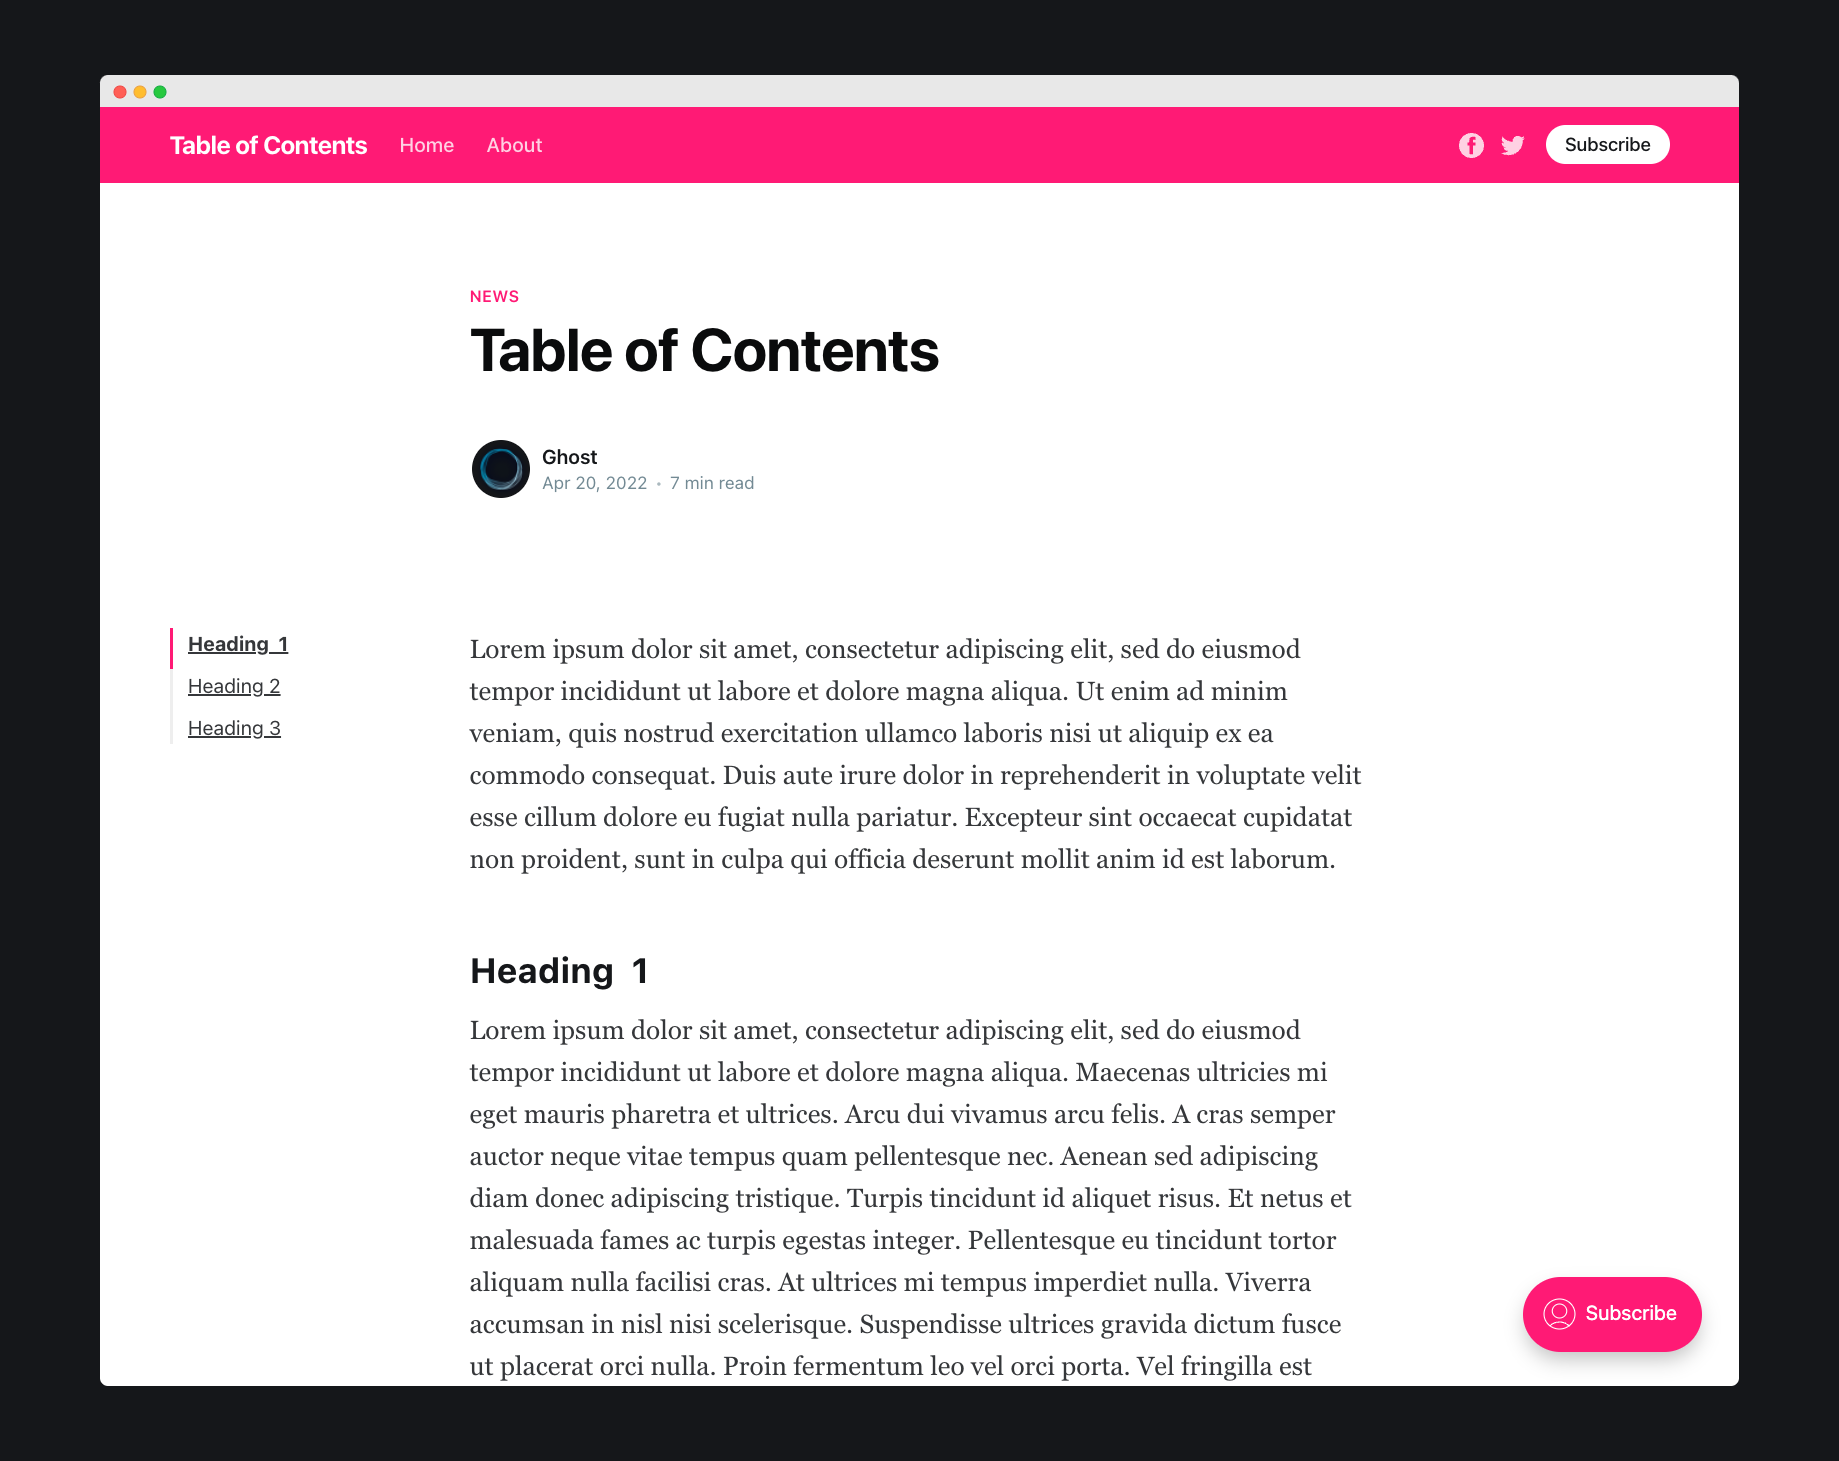 How to add a table of contents